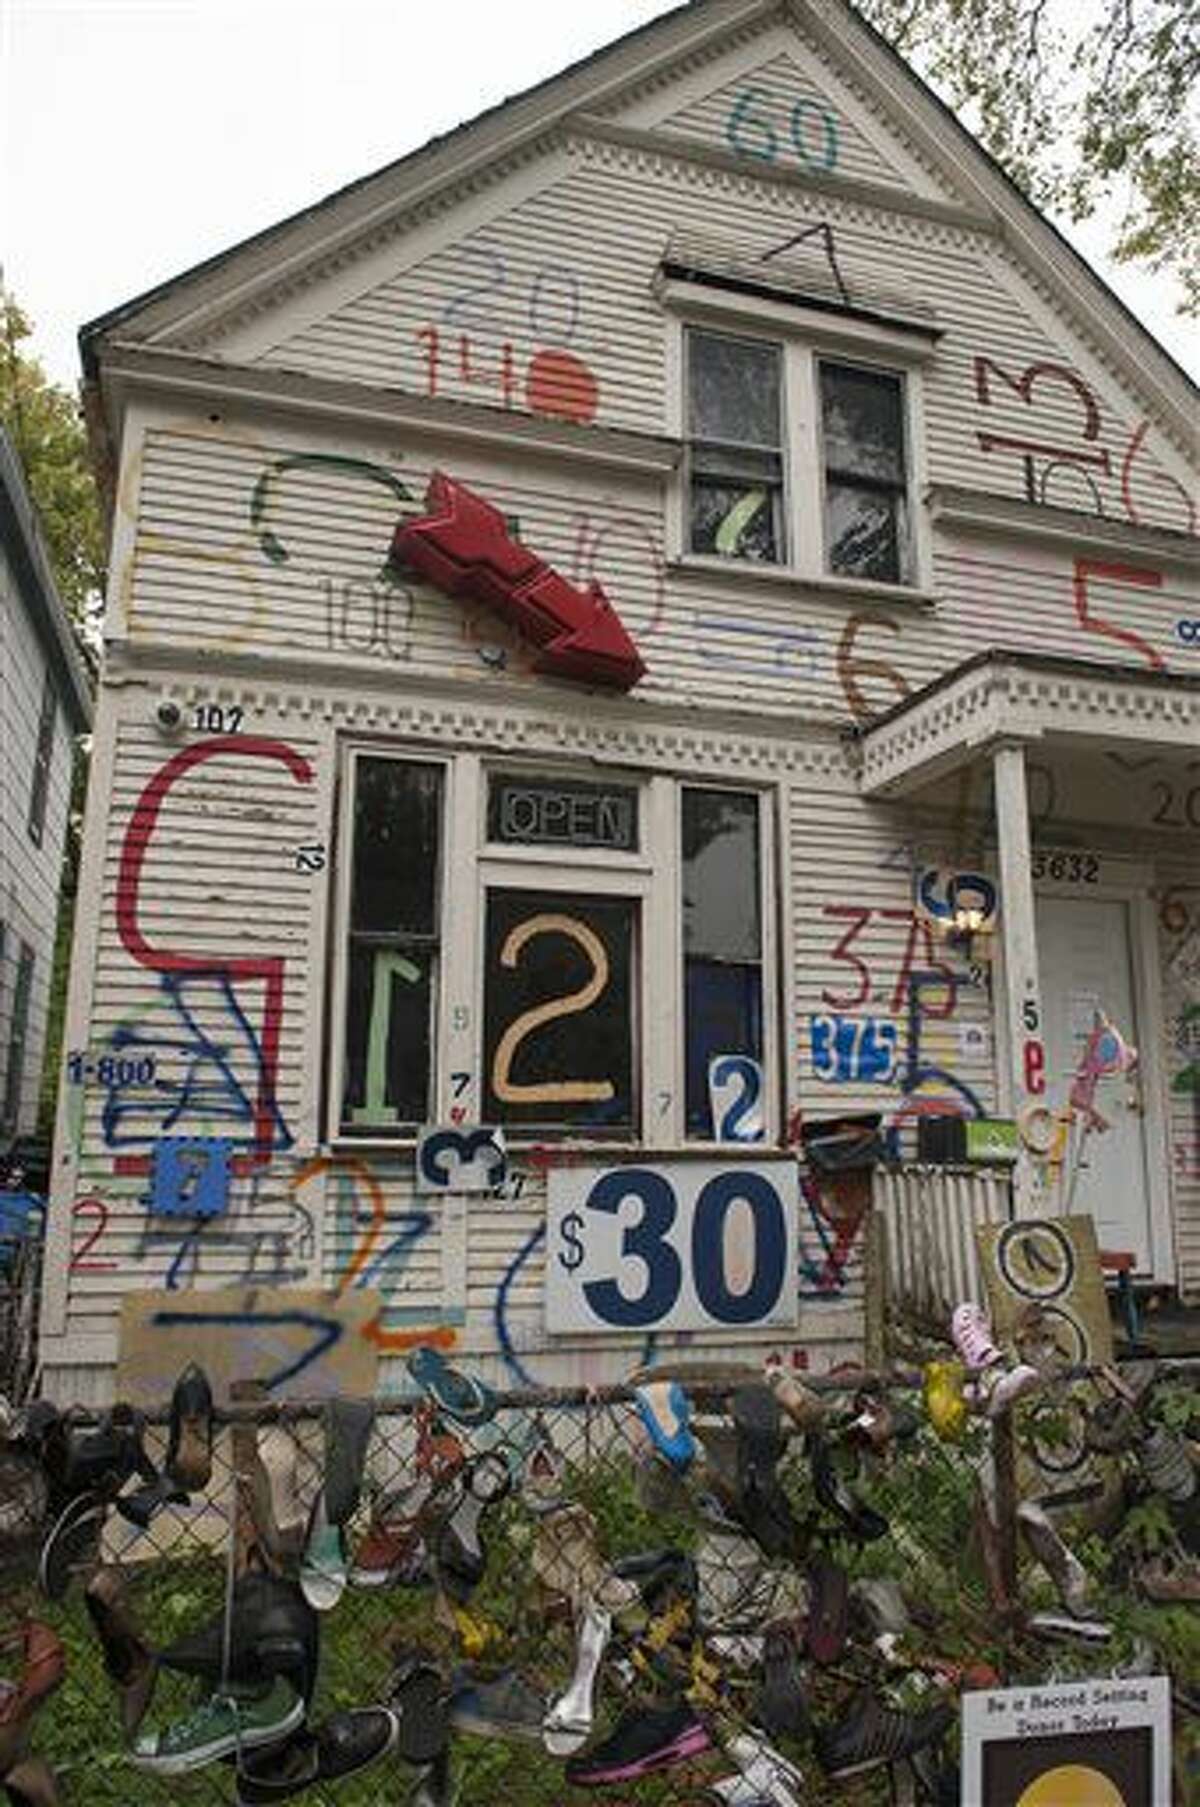 A Sept. 30, 2016 photo shows the exterior of the Number House at the Heidelberg Project, in Detroit. The Heidelberg Project in Detroit is launching a $100,000 capital campaign as its creator looks to remake and largely dismantle the outdoor art installation. (John T. Greilick/The Detroit News via AP)